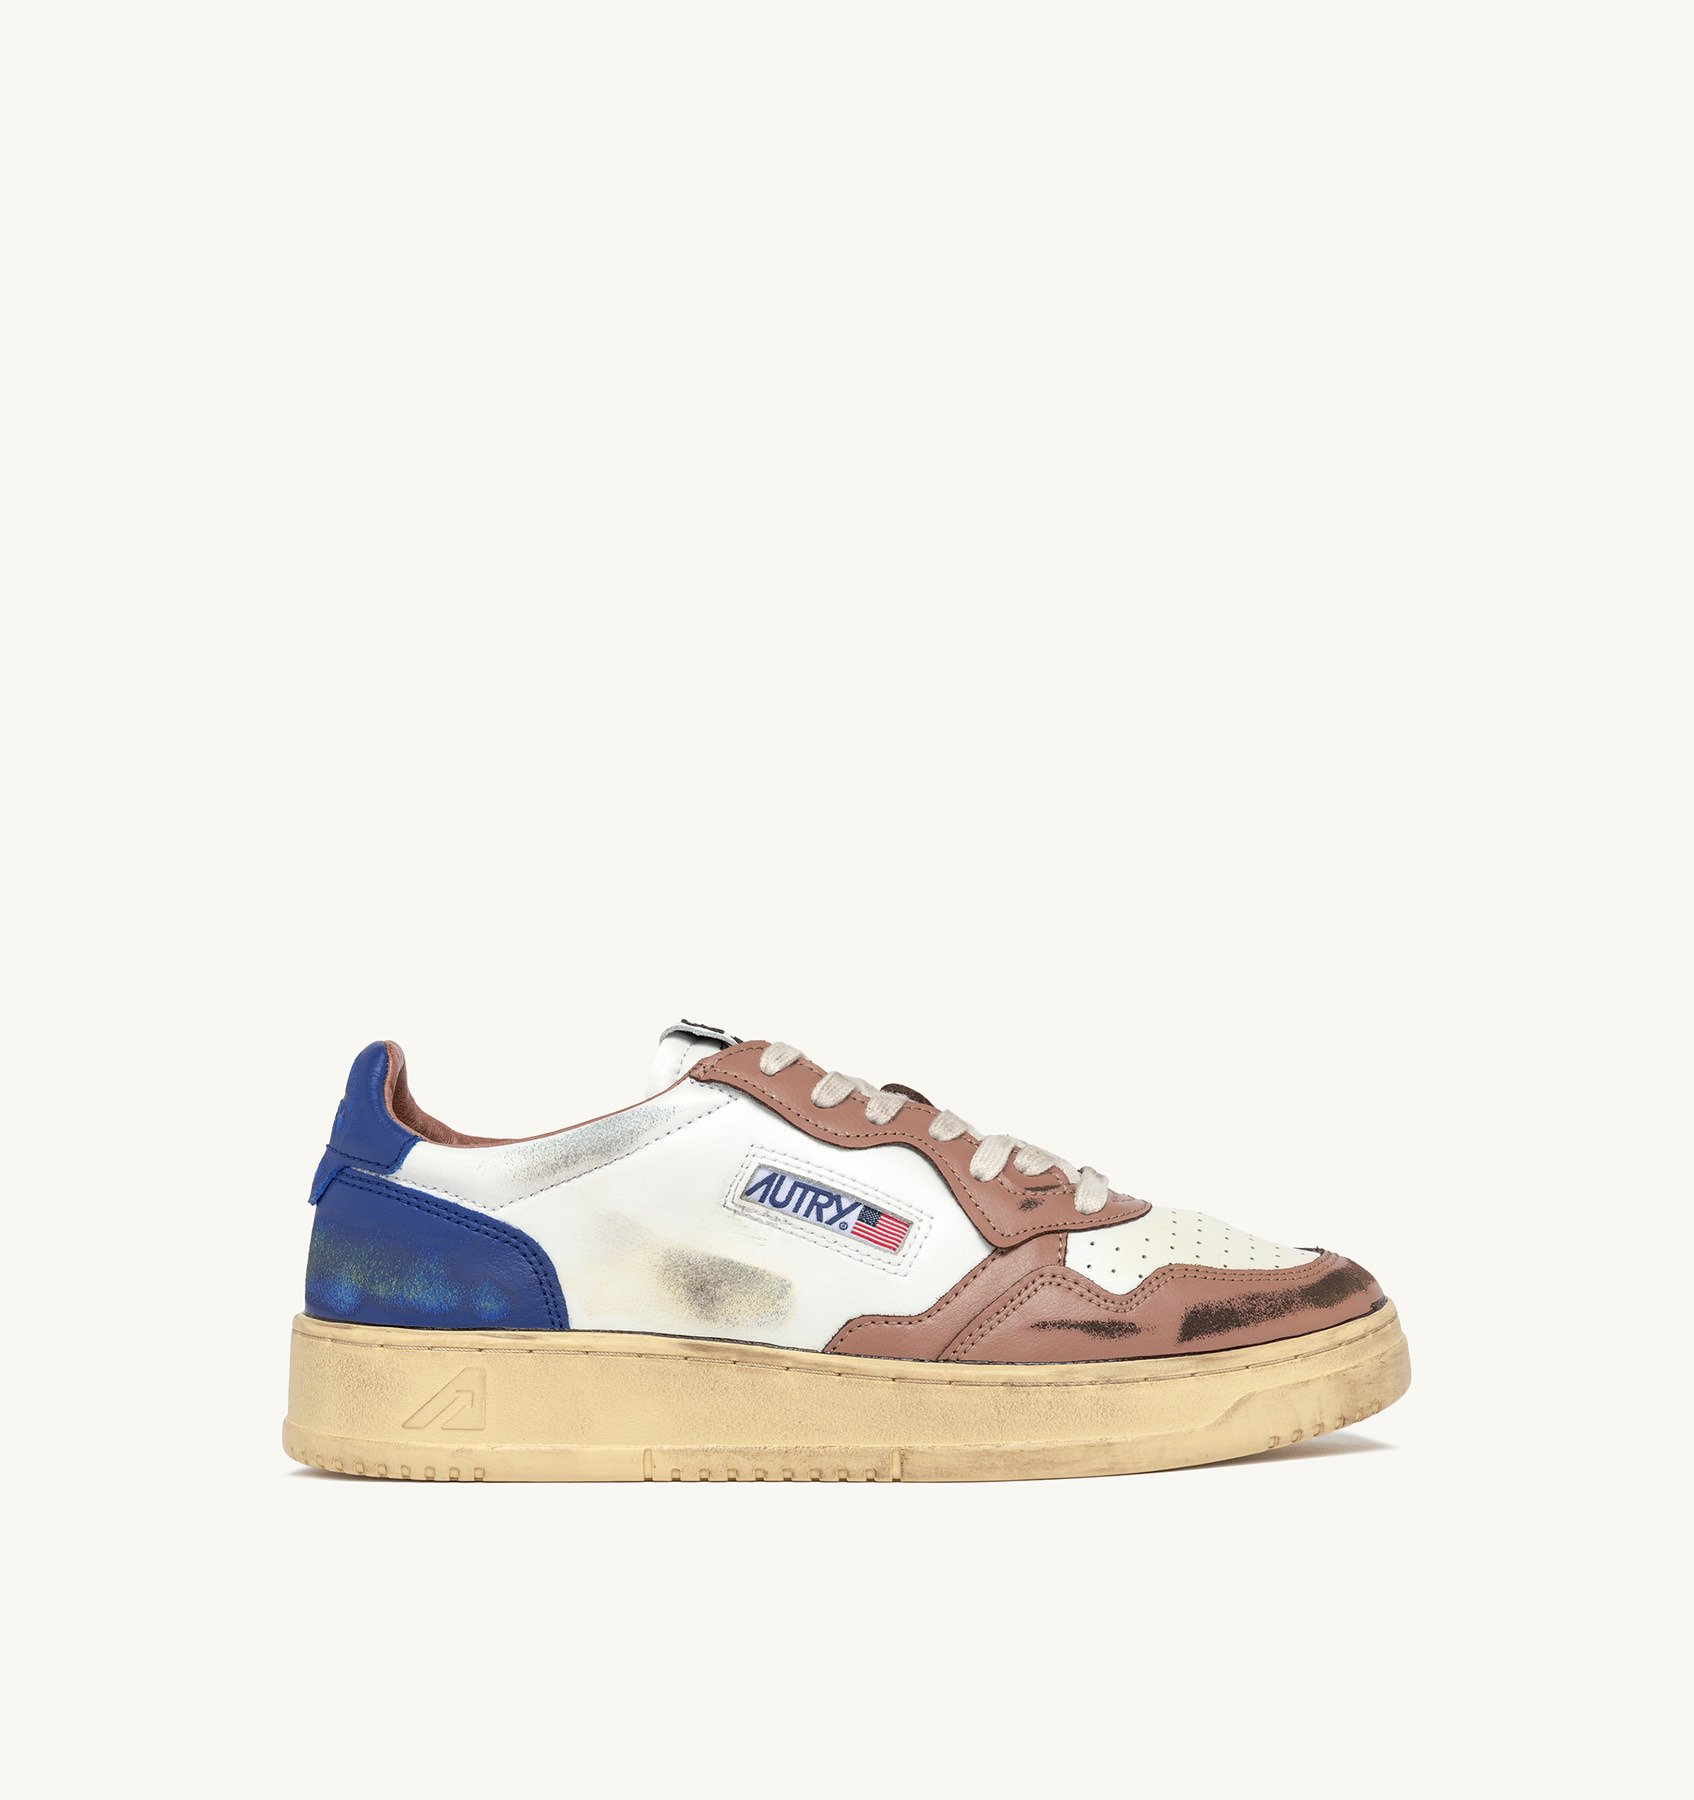 Autry MEDALIST LOW SUPER VINTAGE SNEAKERS IN WHITE BROWN AND BLUE LEATHER